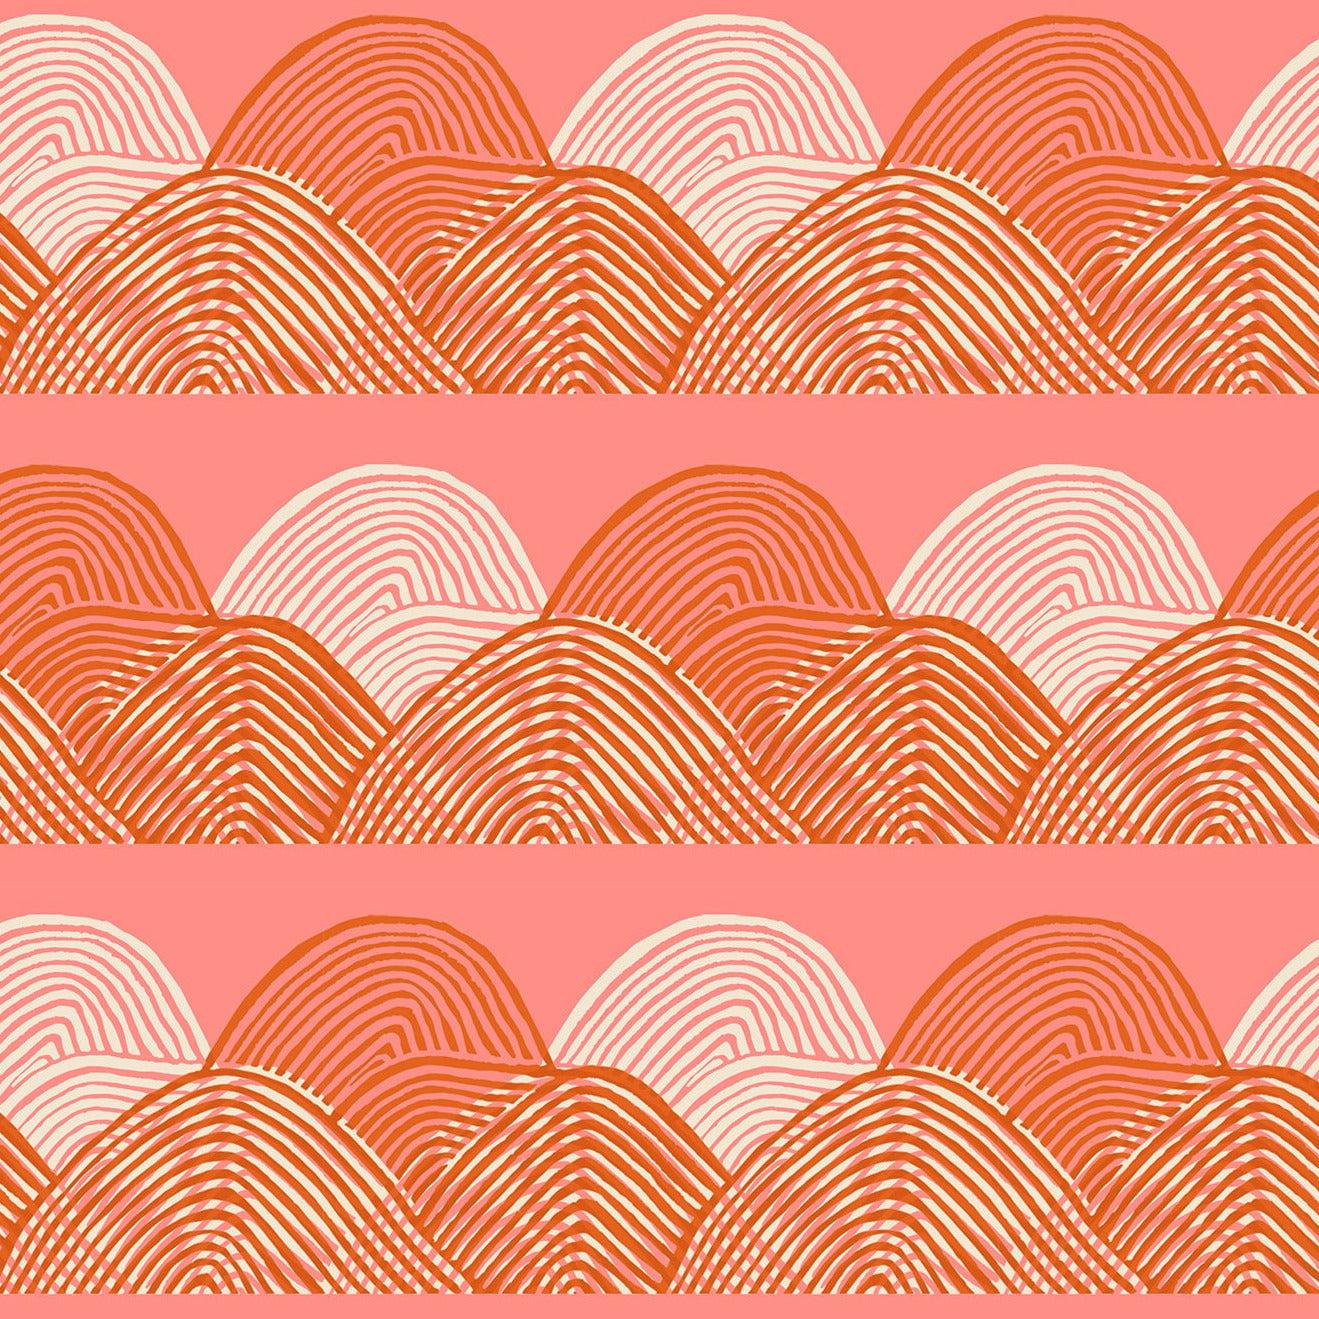 Ruby Star Society-Headlands Melon-fabric-gather here online